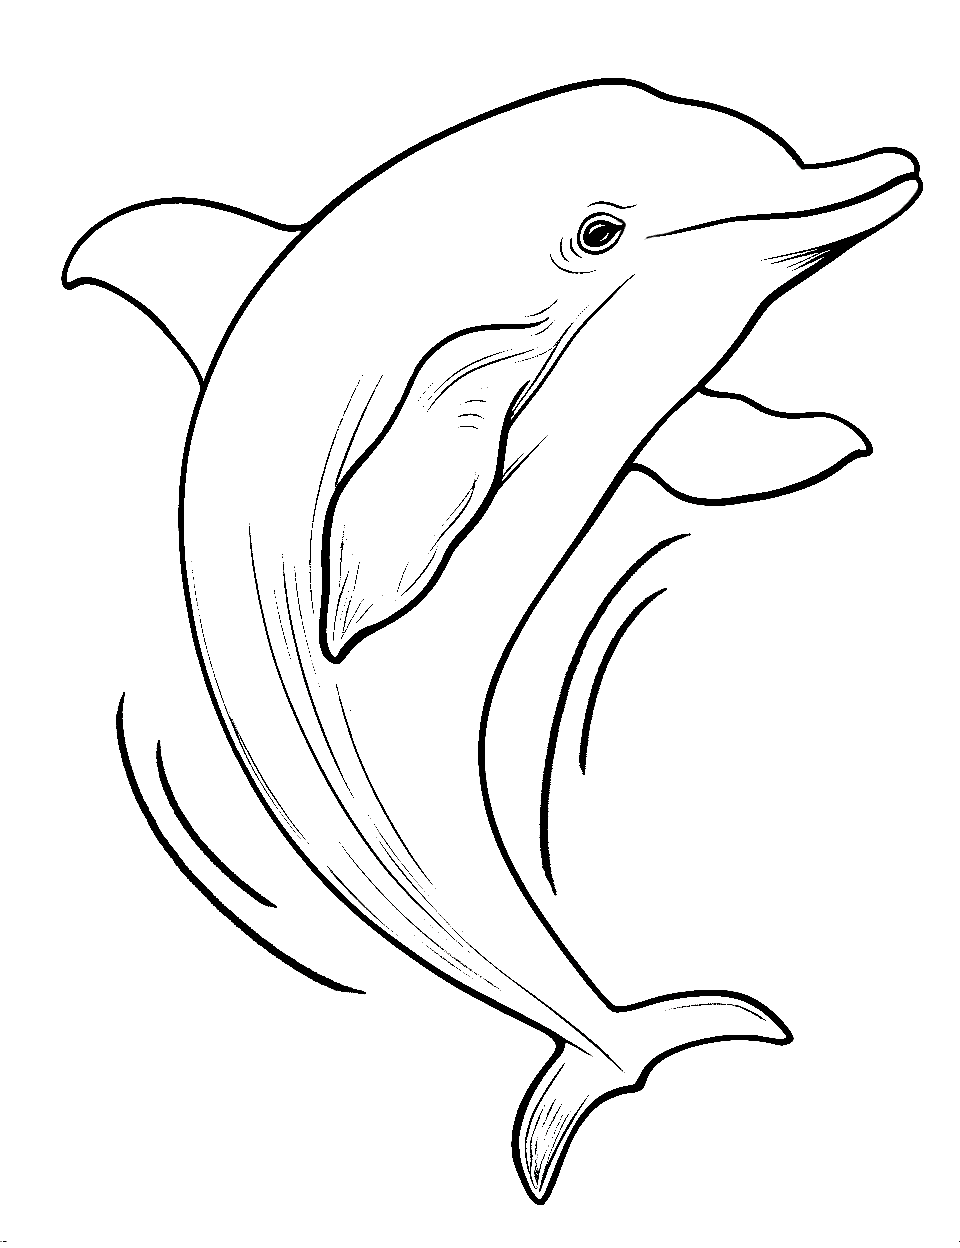 Dolphin Jumping Coloring Page - A big dolphin jumping and performing tricks.